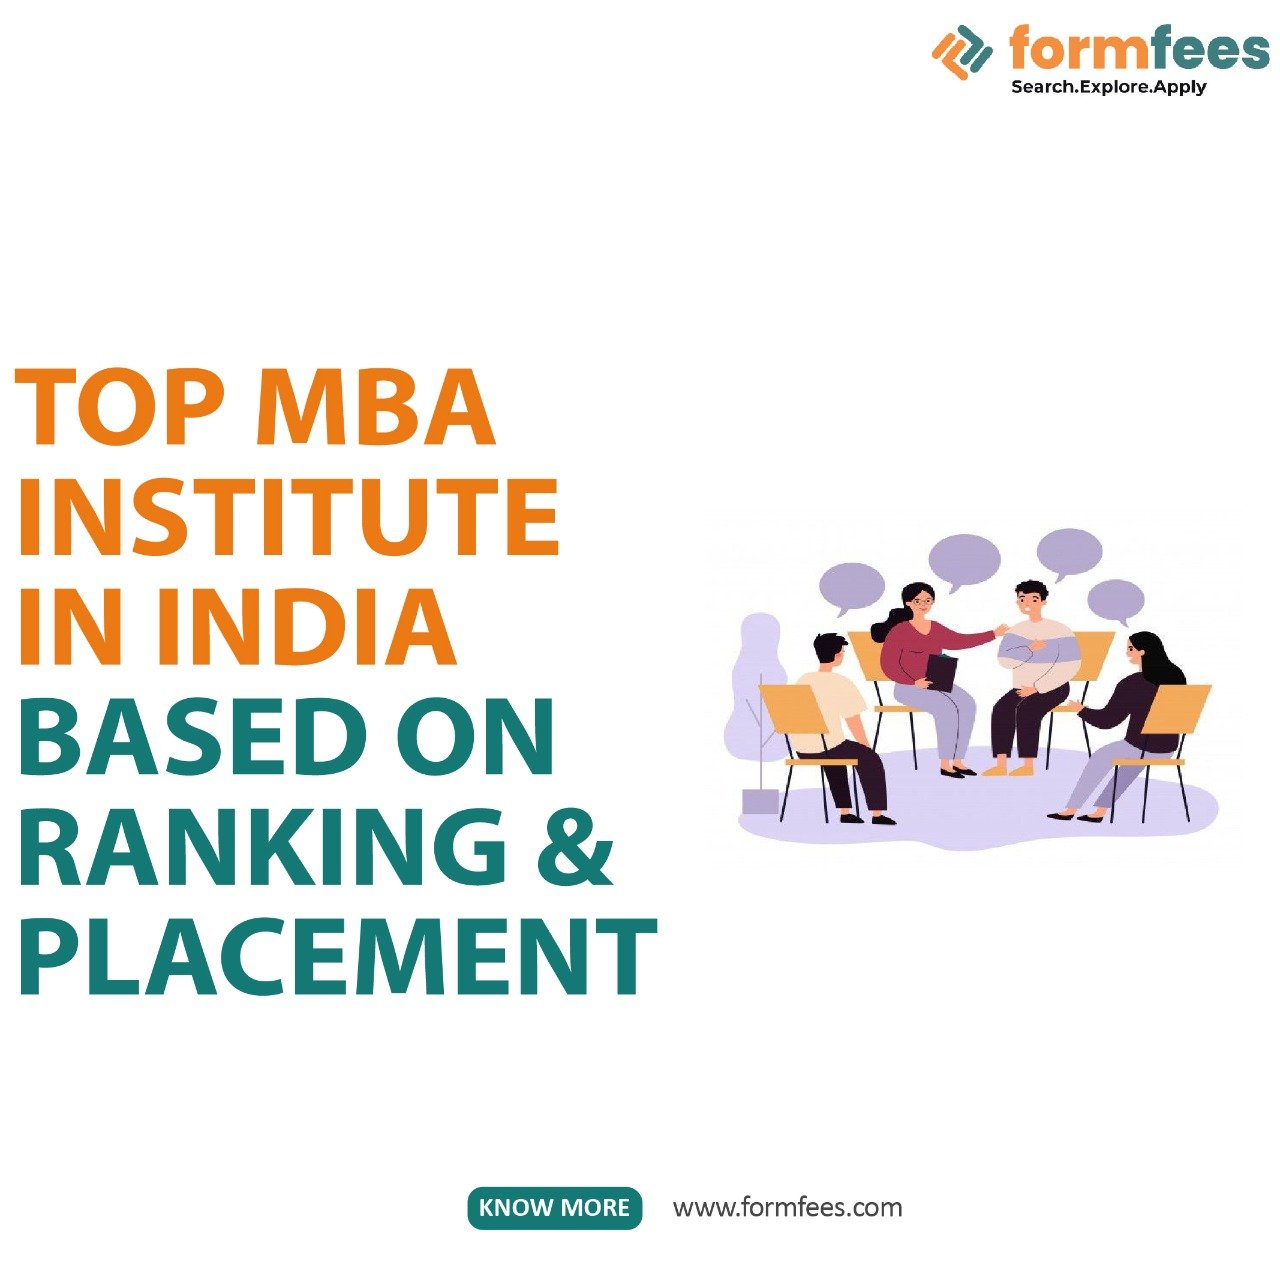 Top MBA Institute in India based on Ranking & Placement